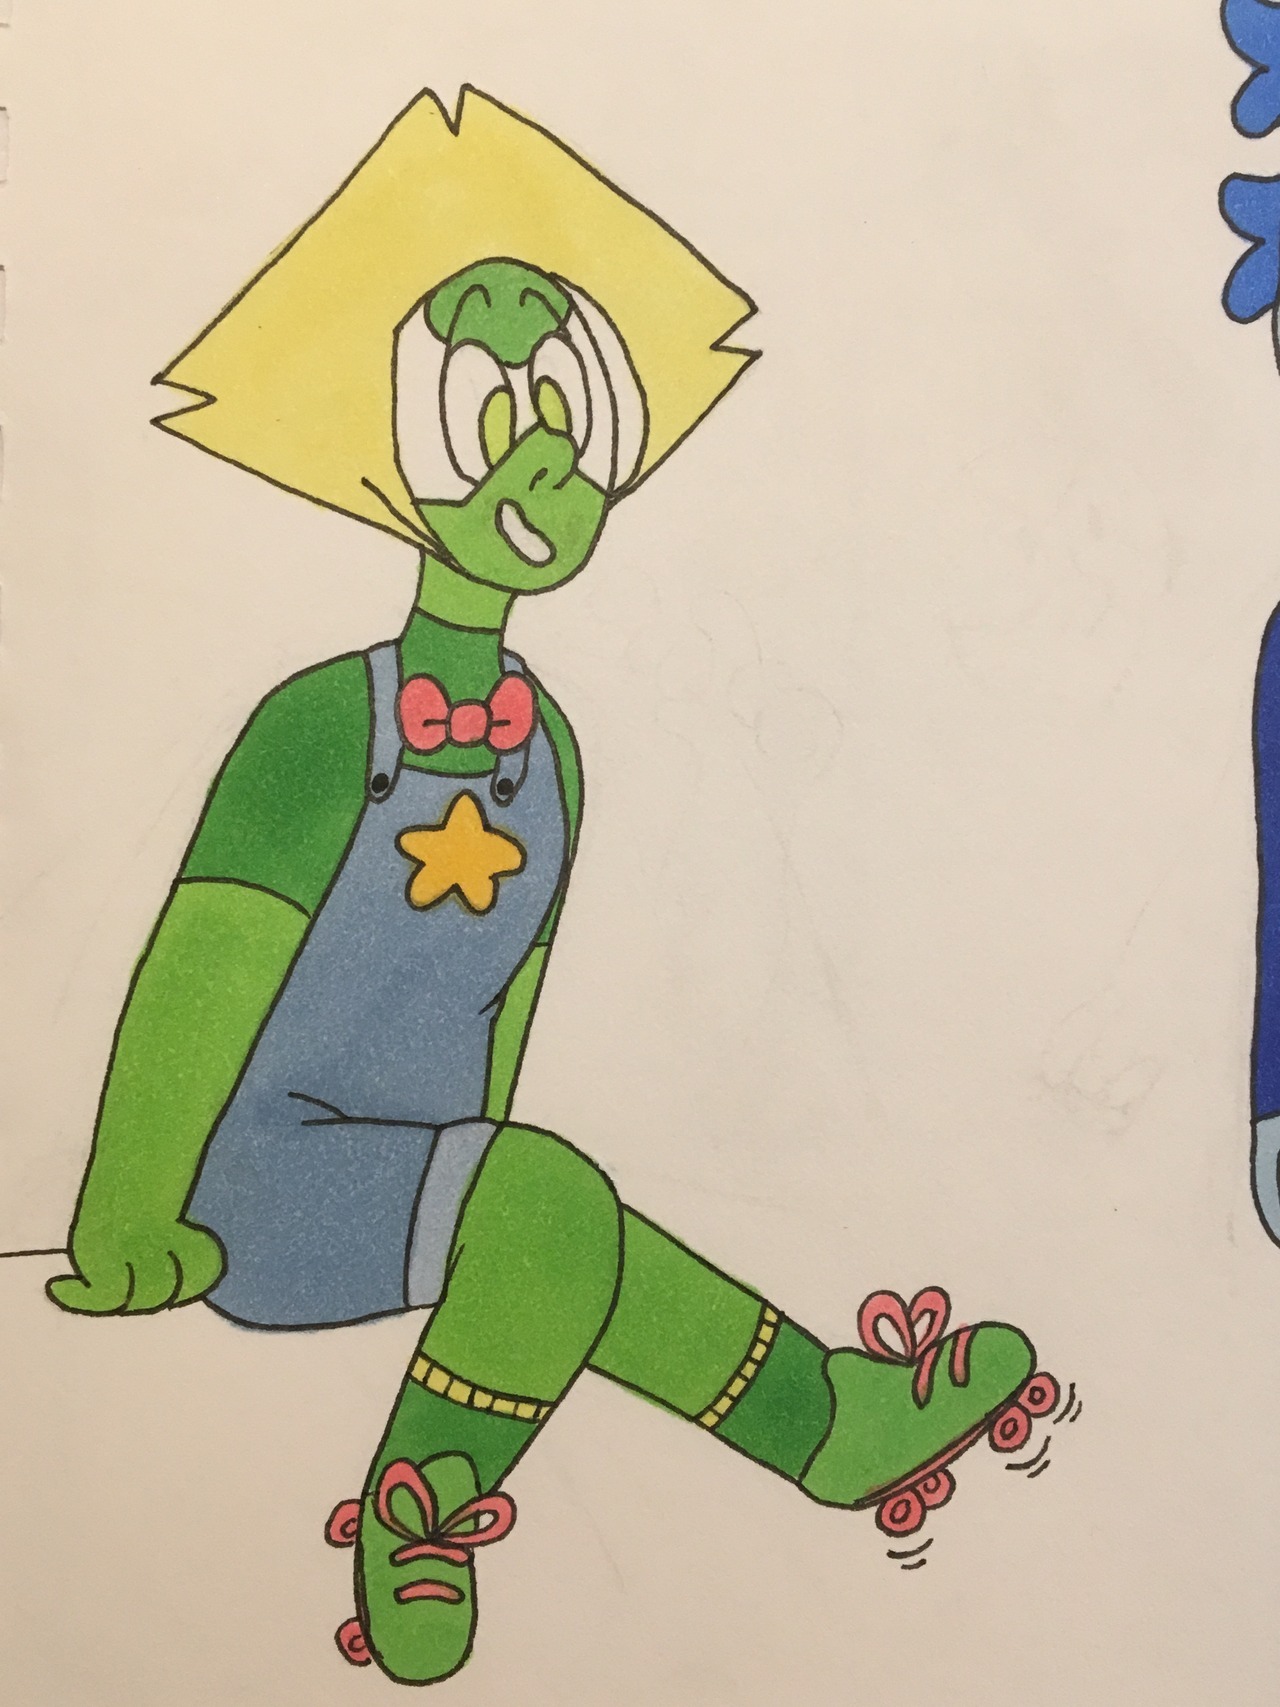 I’m super late to the party but here’s my CG outfits for em!! Peridot in roller skates and Lapis in pants are all I’ve ever really needed.